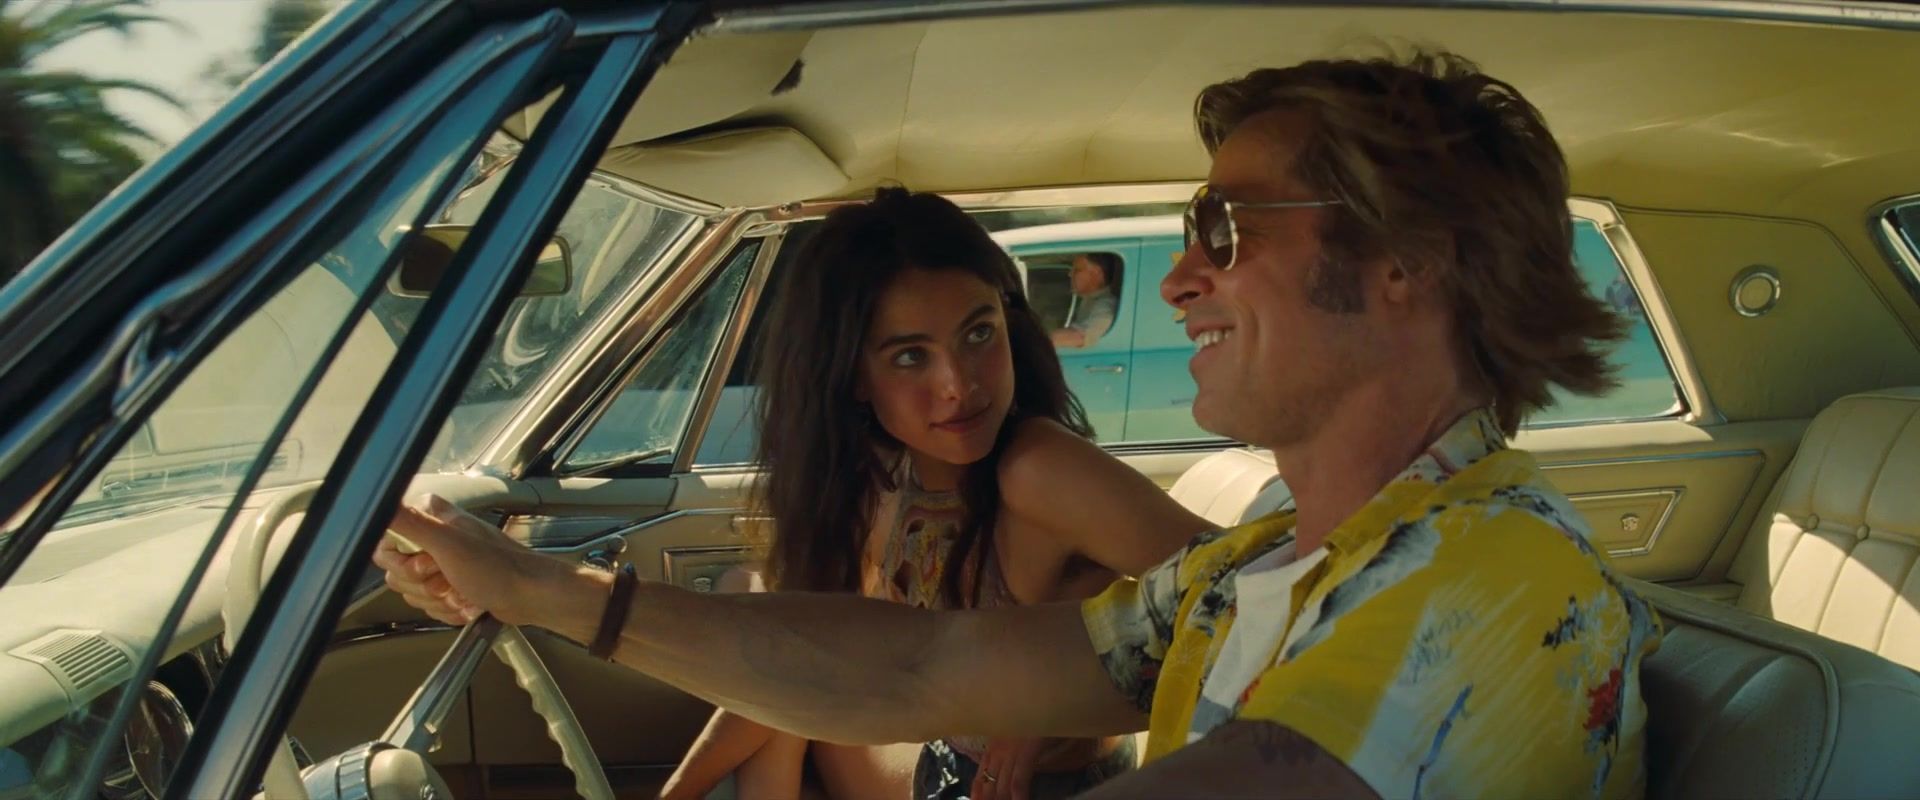 Pete Sexy Dakota Fanning, Margaret Qualley naked- Once Upon A Time In Hollywood (2019) Private - 2